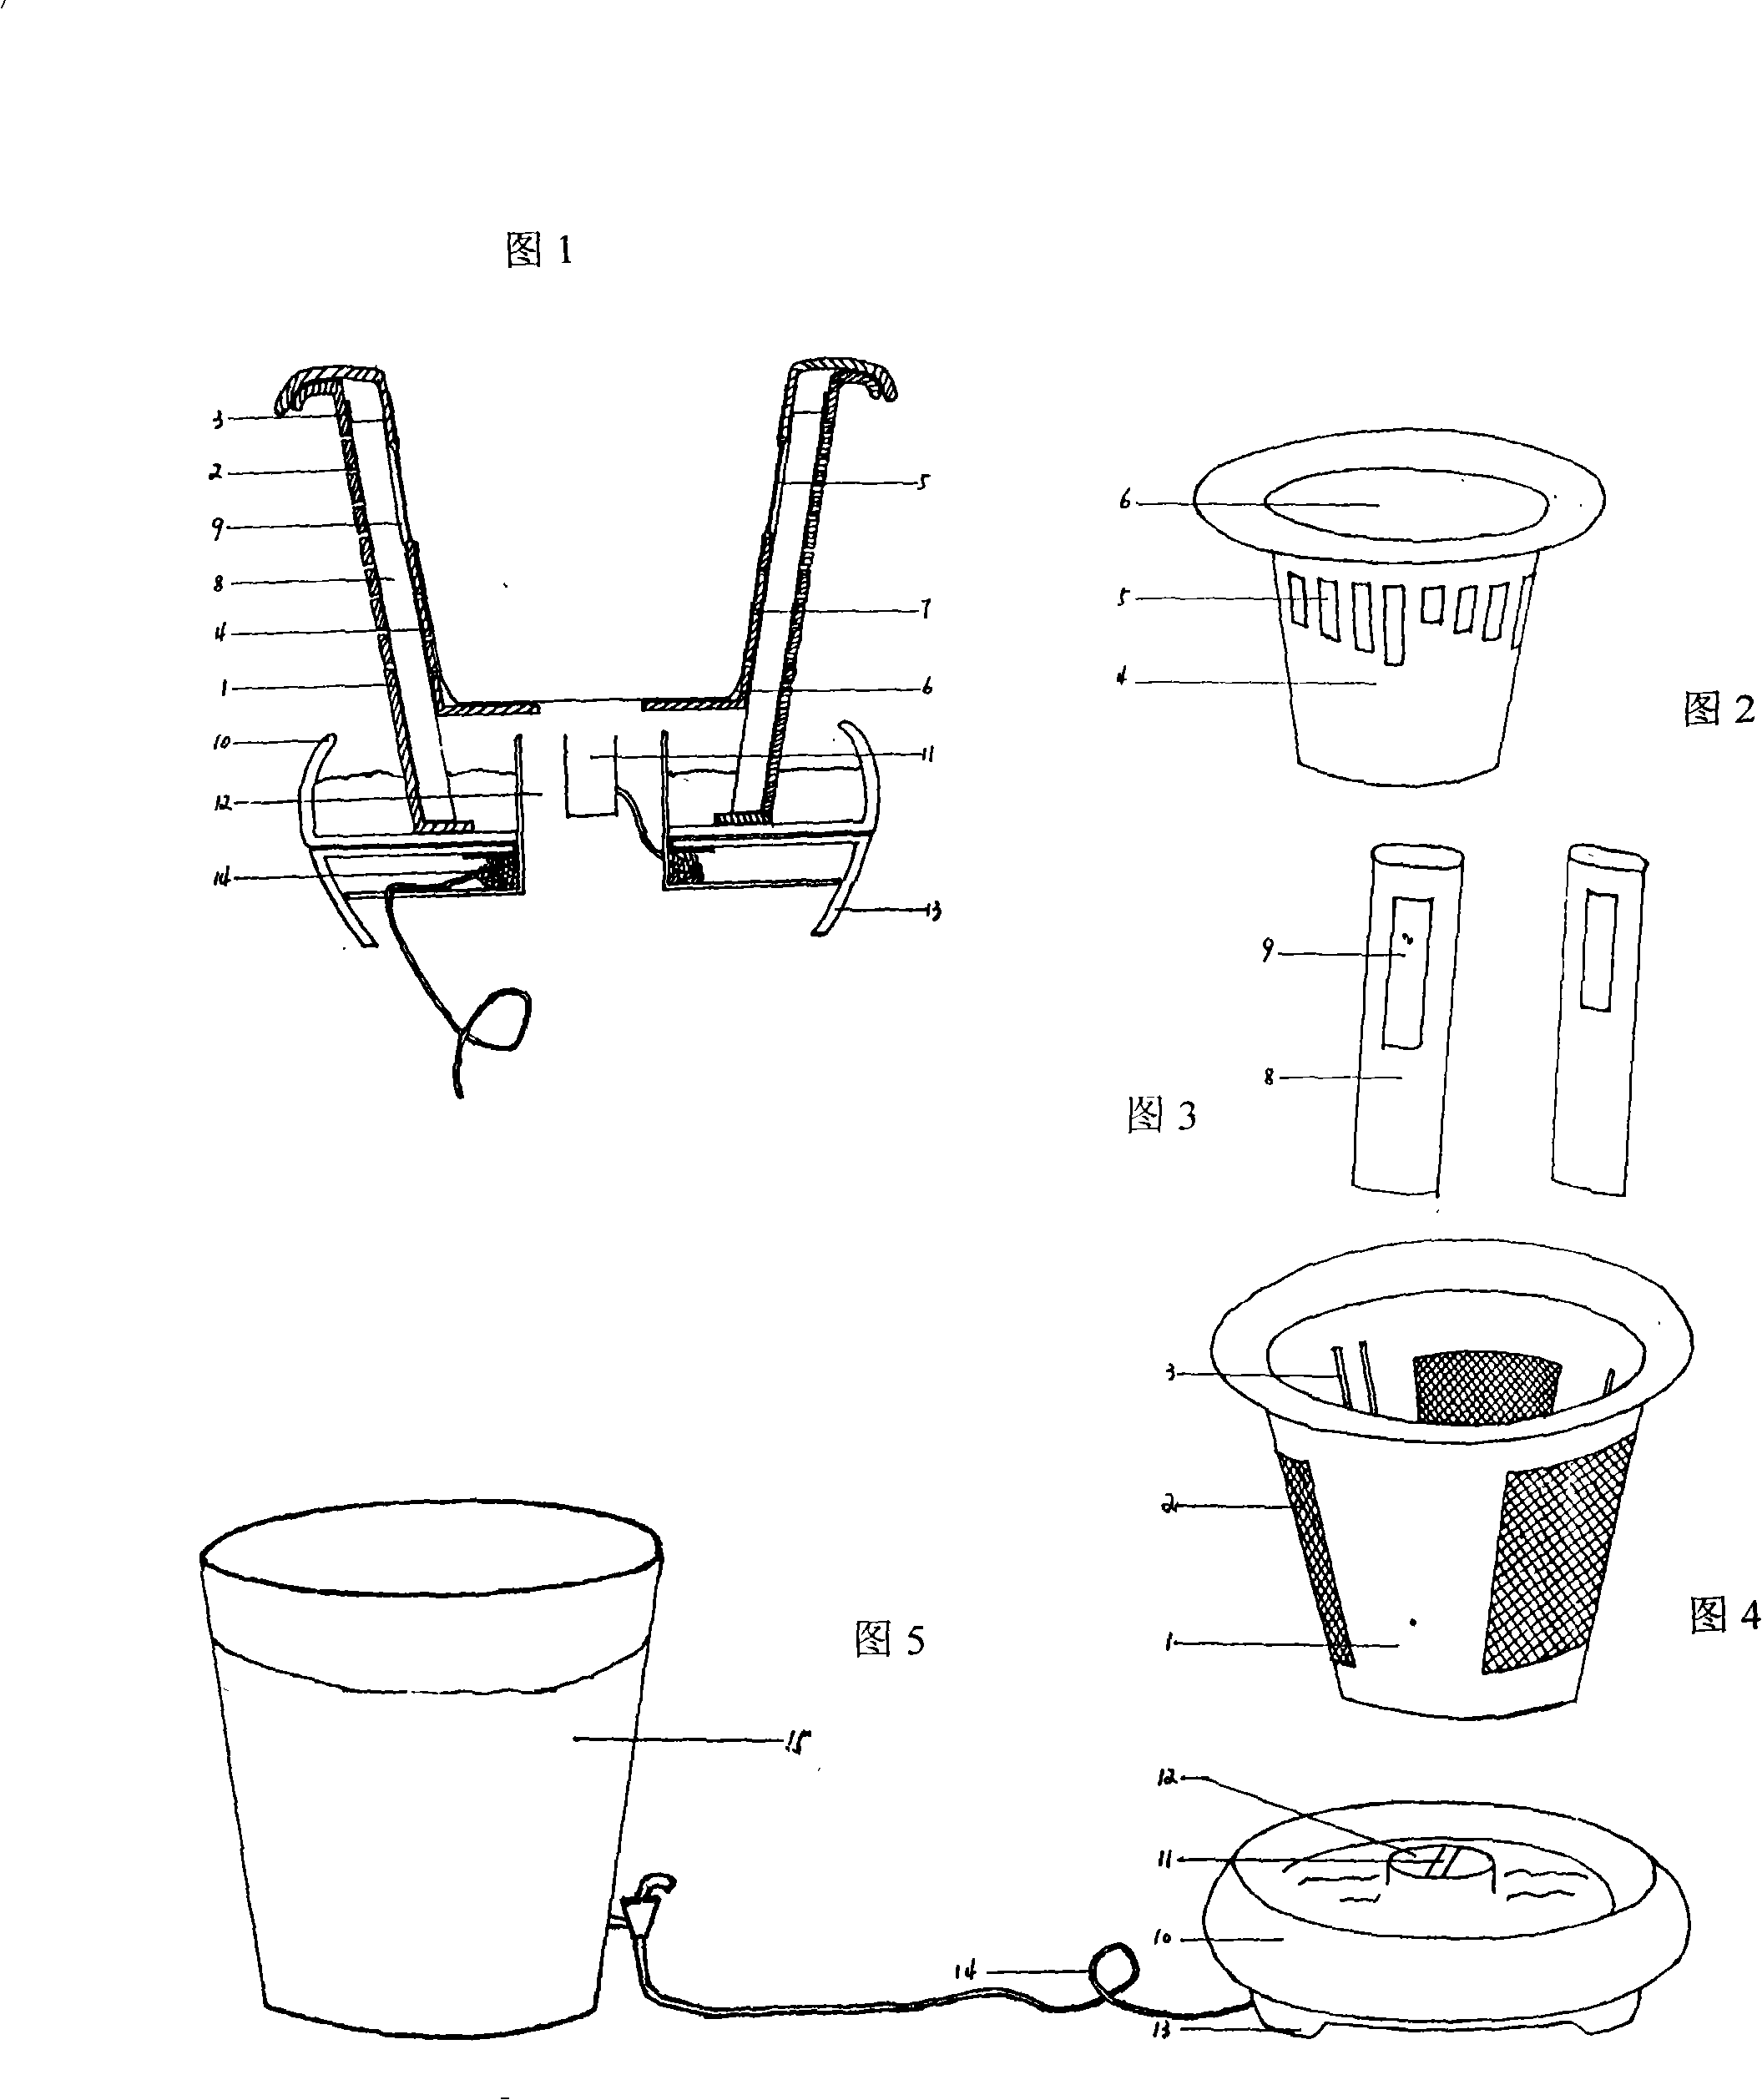 Self-absorption type flower-pot without watering